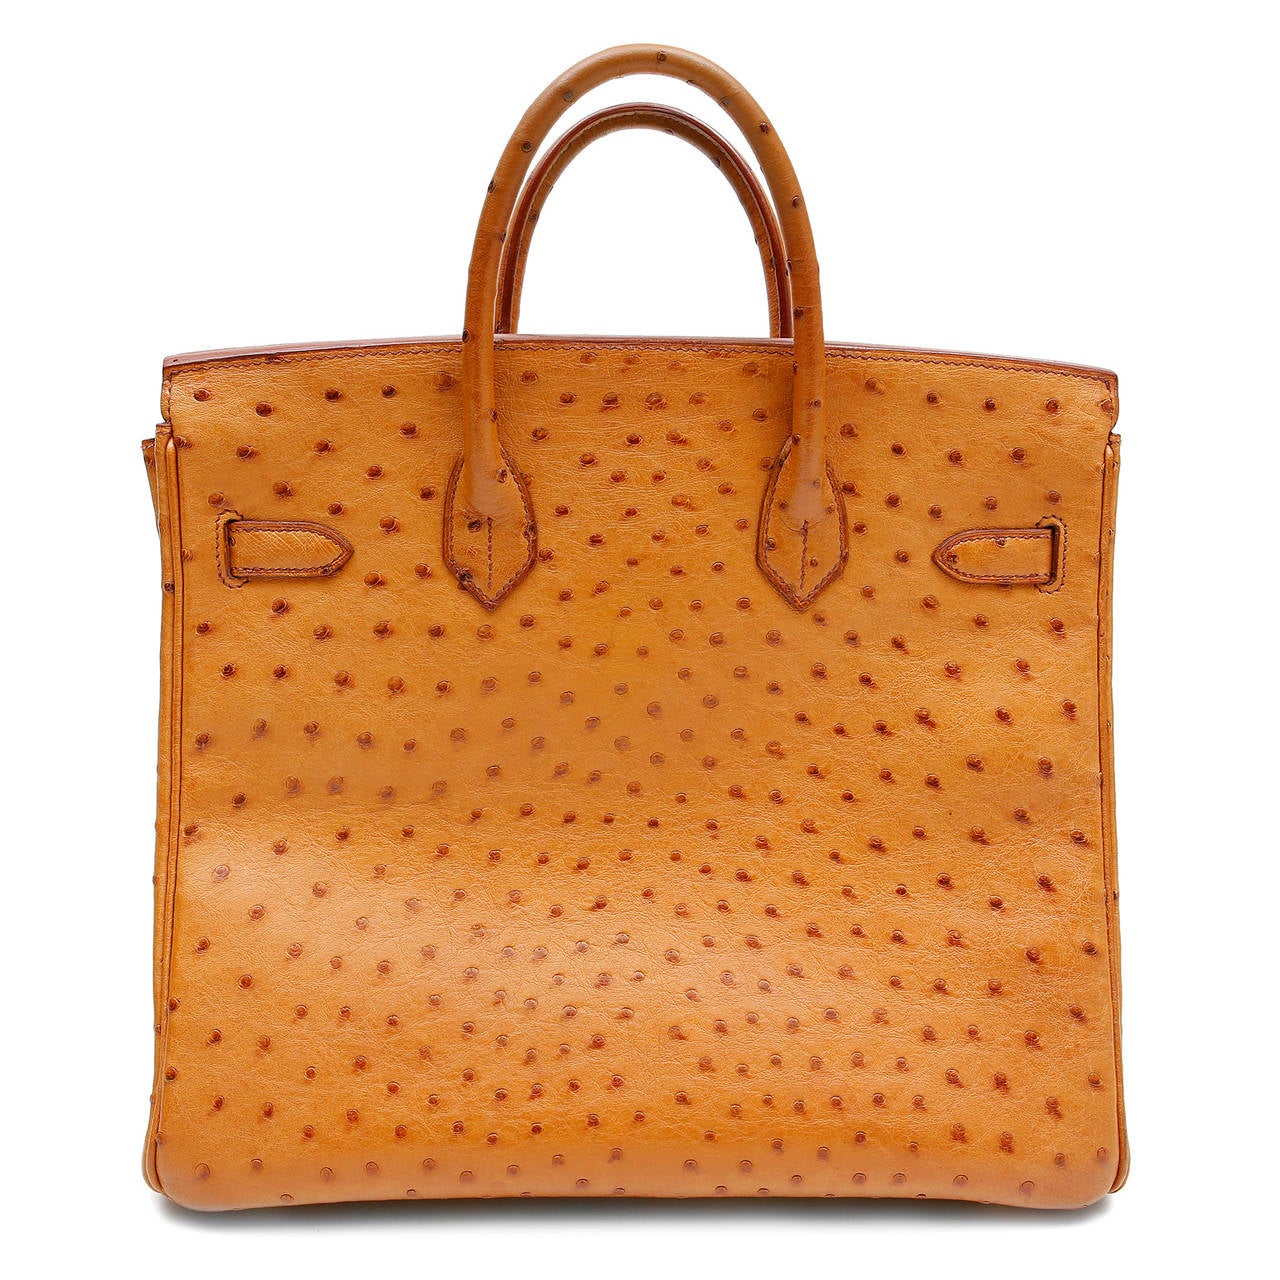 Hermès Miel Ostrich 32 cm Haut a Courroies- HAC Birkin Bag
Pristine condition
Considered the ultimate luxury item the world over and hand stitched by skilled craftsmen, wait lists of a year or more are commonplace for Hermès bags. This